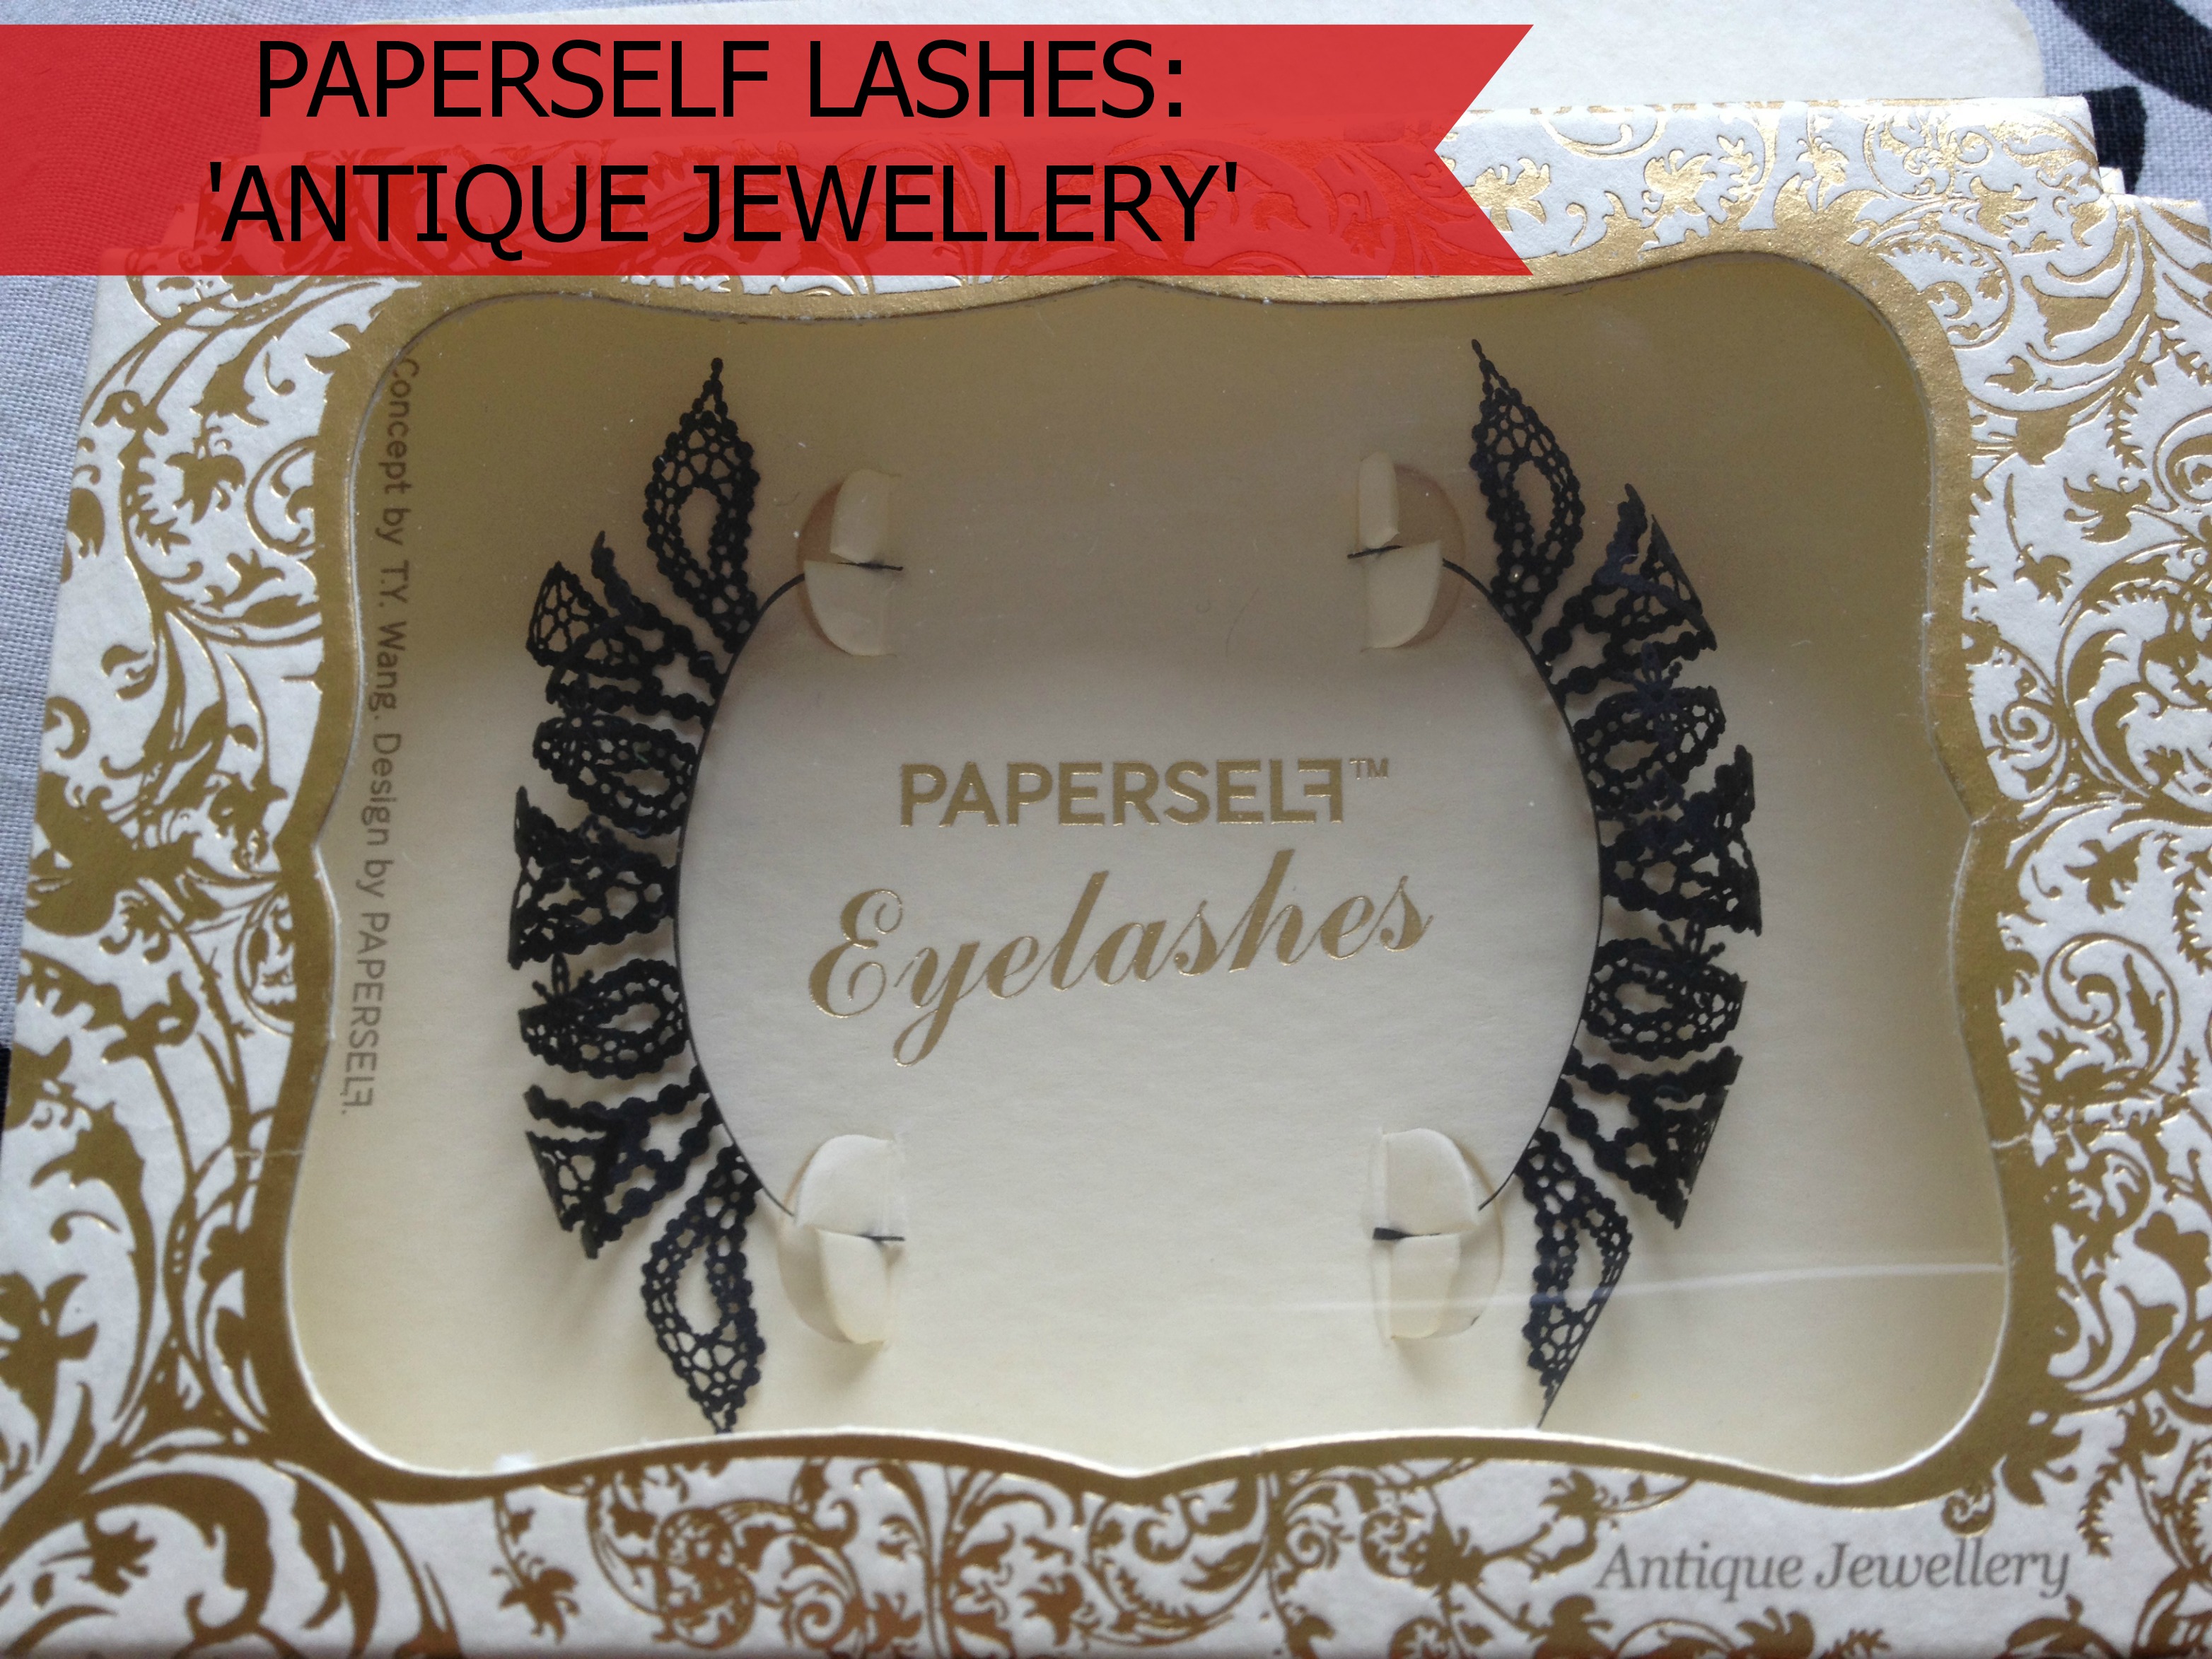 Paperself_Lashes_Antique_Jewellery